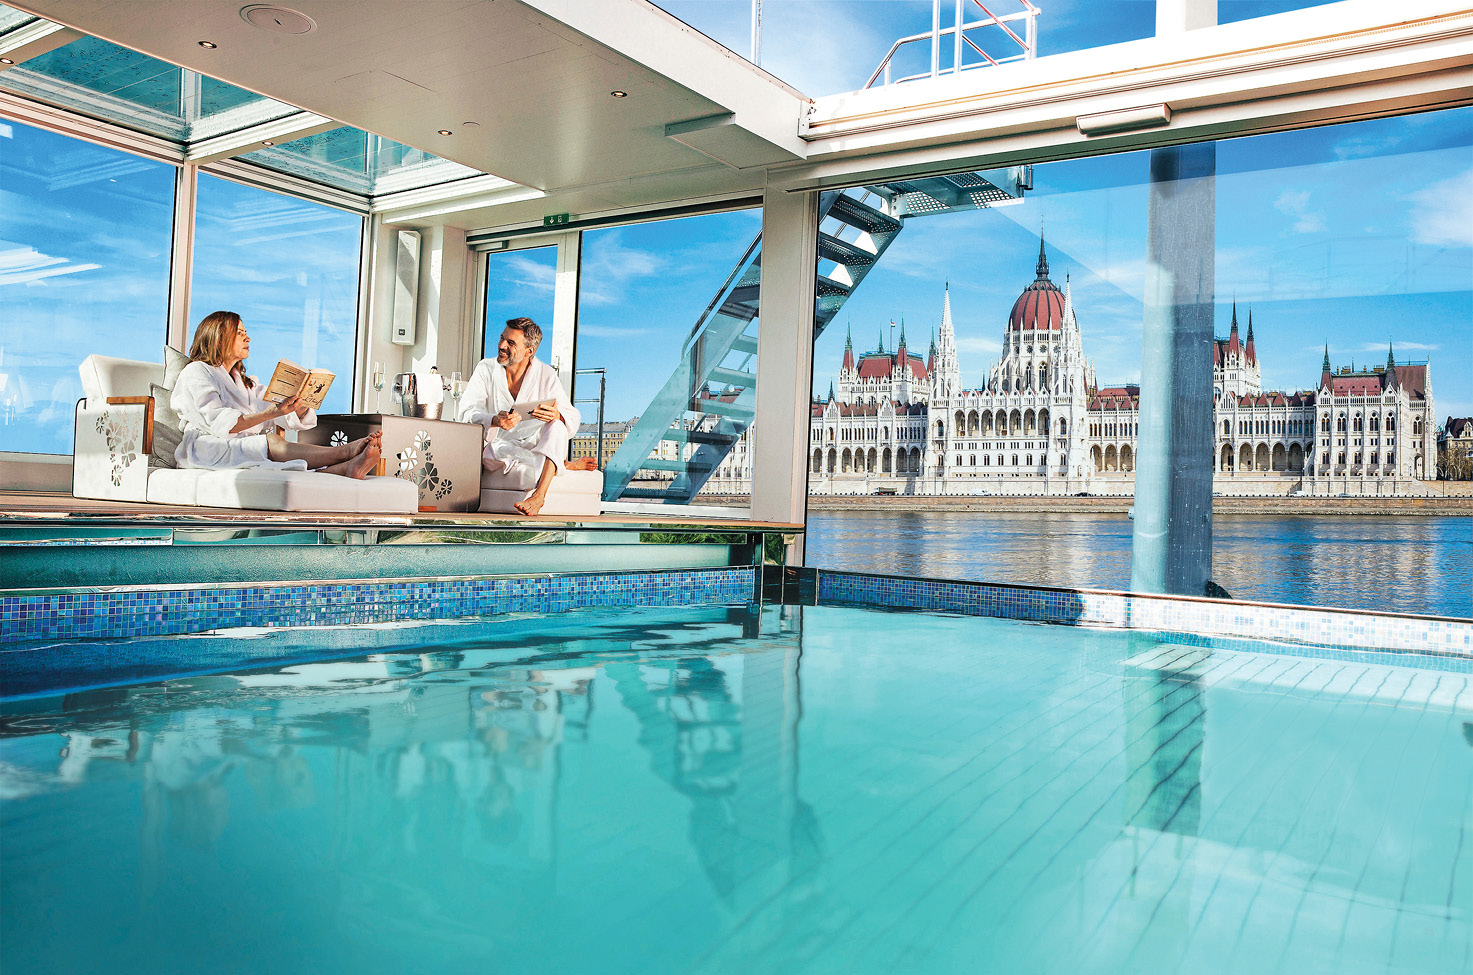 Iconic view of the Budapest parliament from the indoor pool on board Emerald Cruises’ luxury river ship